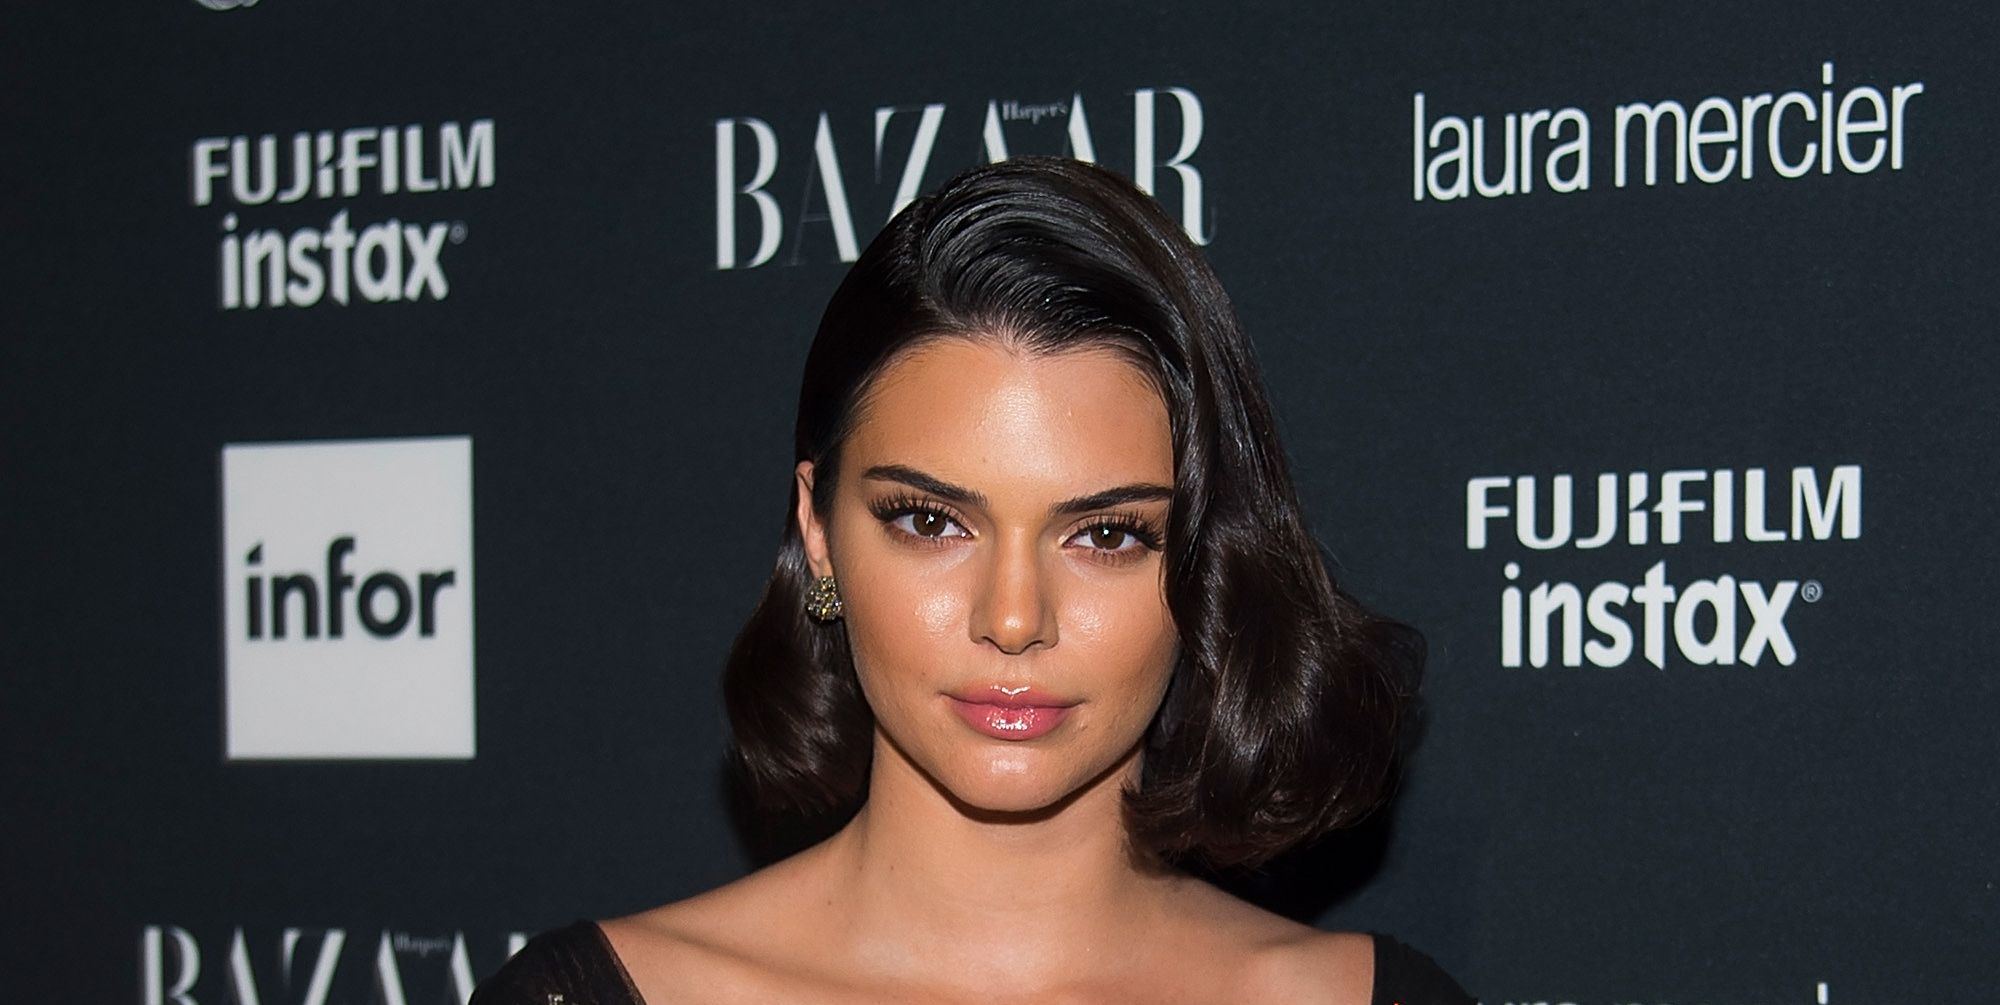 Here's Kendall Jenner in a Super Sheer Bedazzled Confection